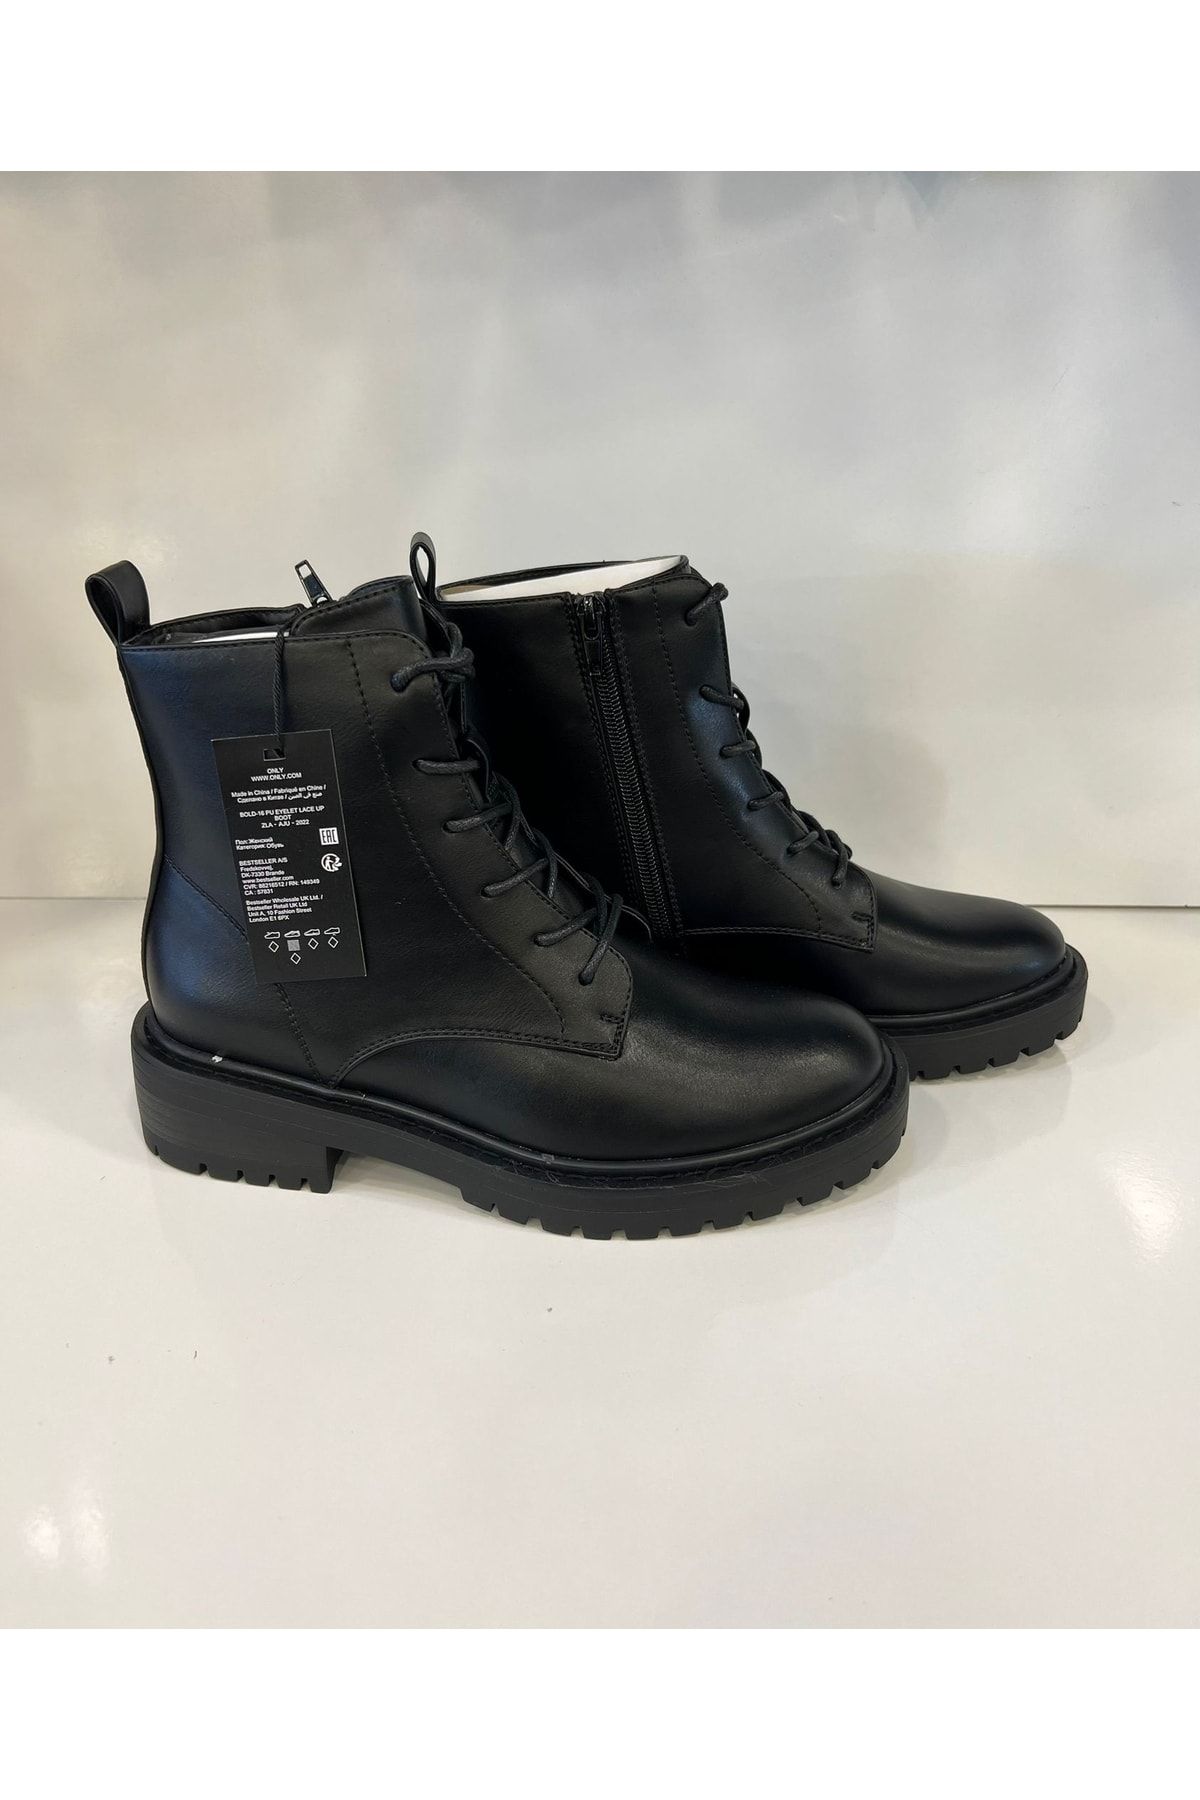 Only Onlbold-1 Pu Eyelet Lace Up Boot